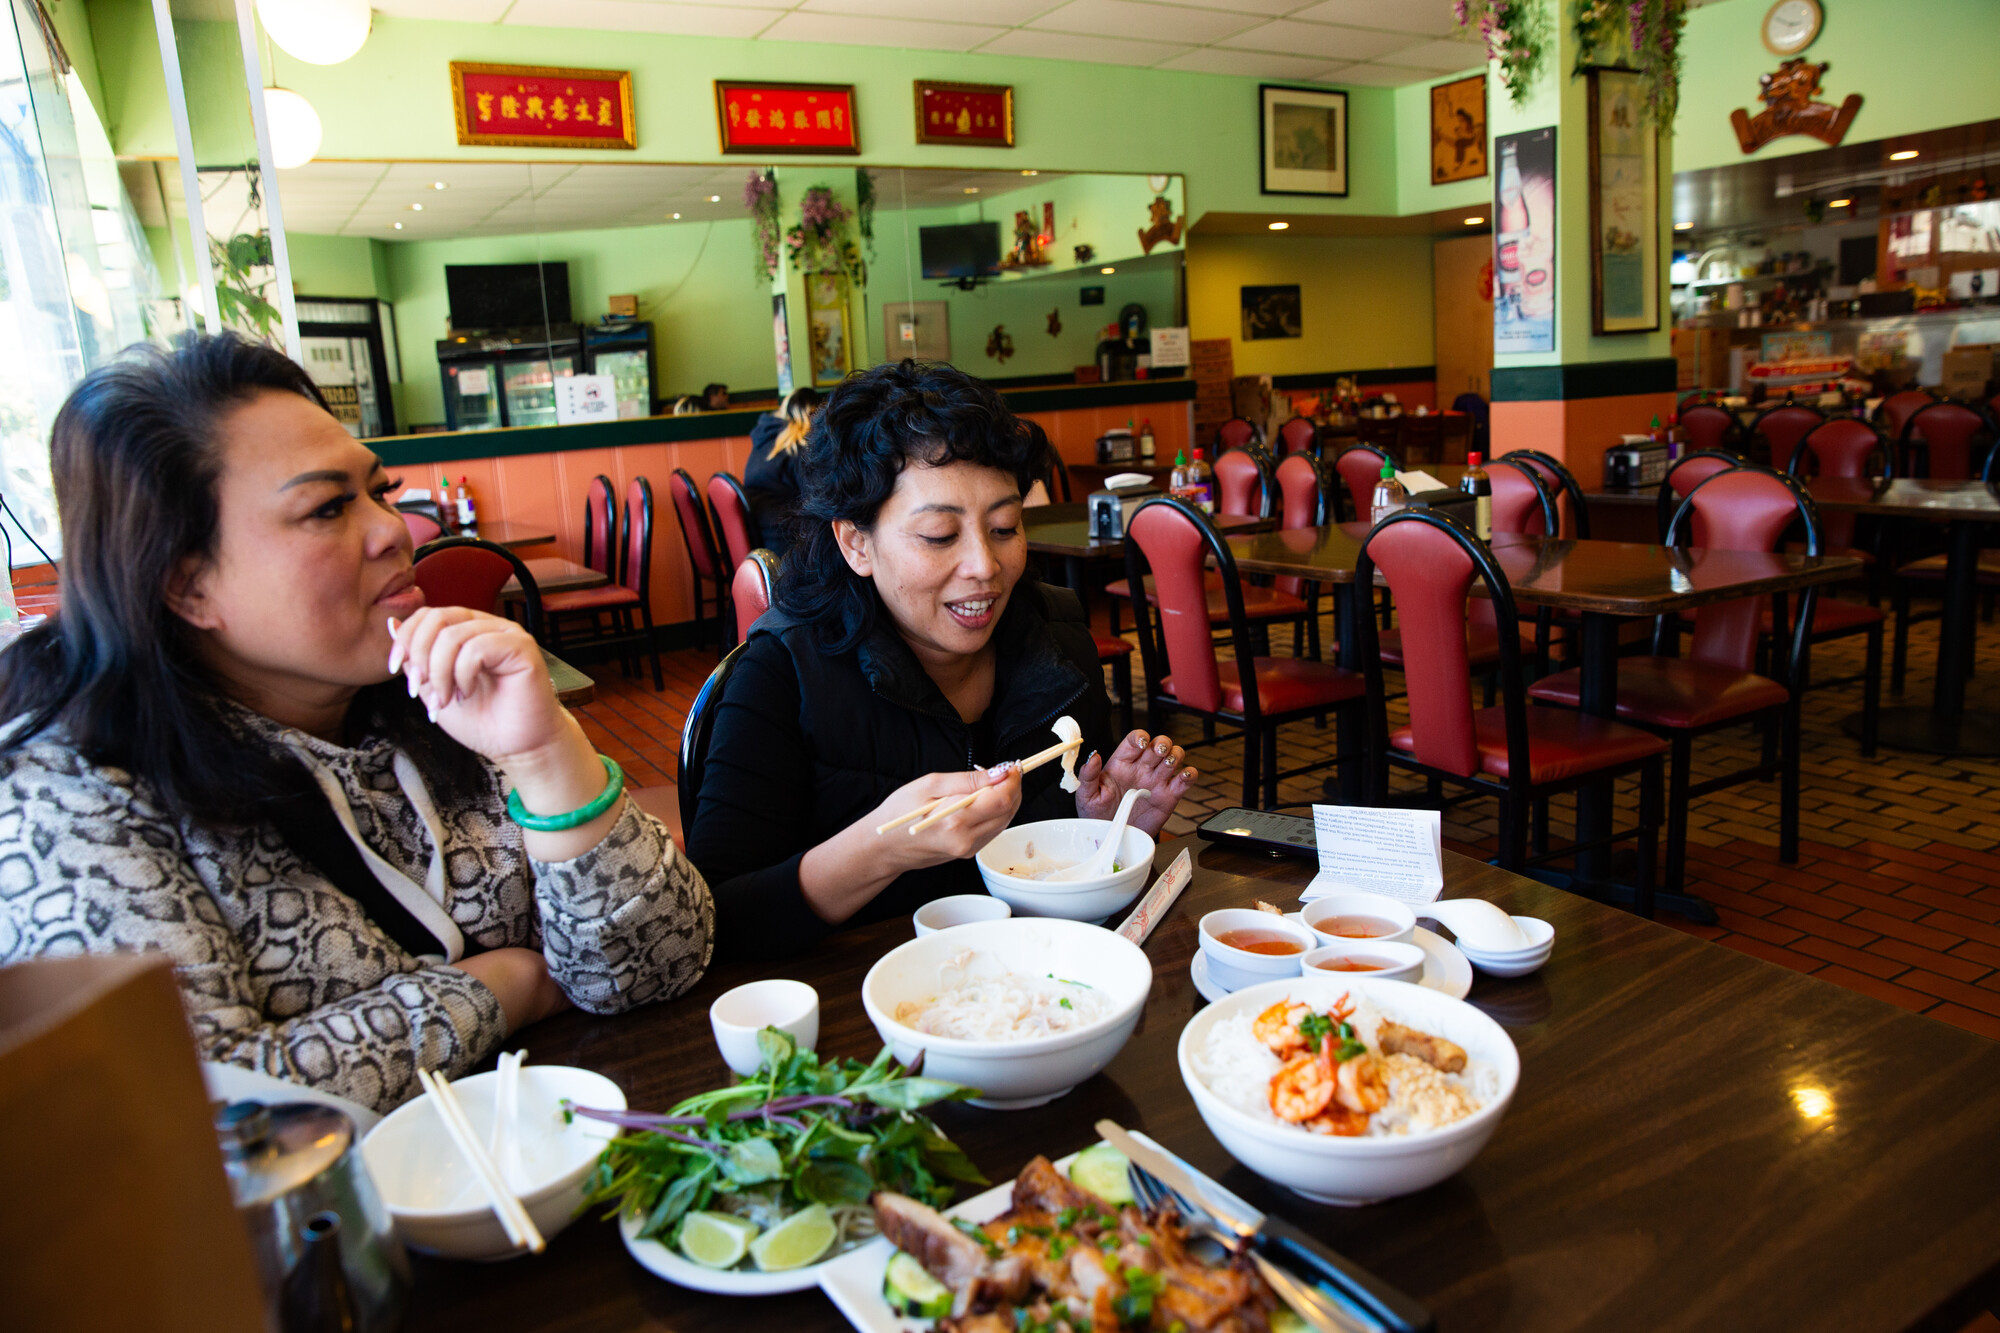 Two women eating noodles with a spread of Vietnamese food on the table in front of them.